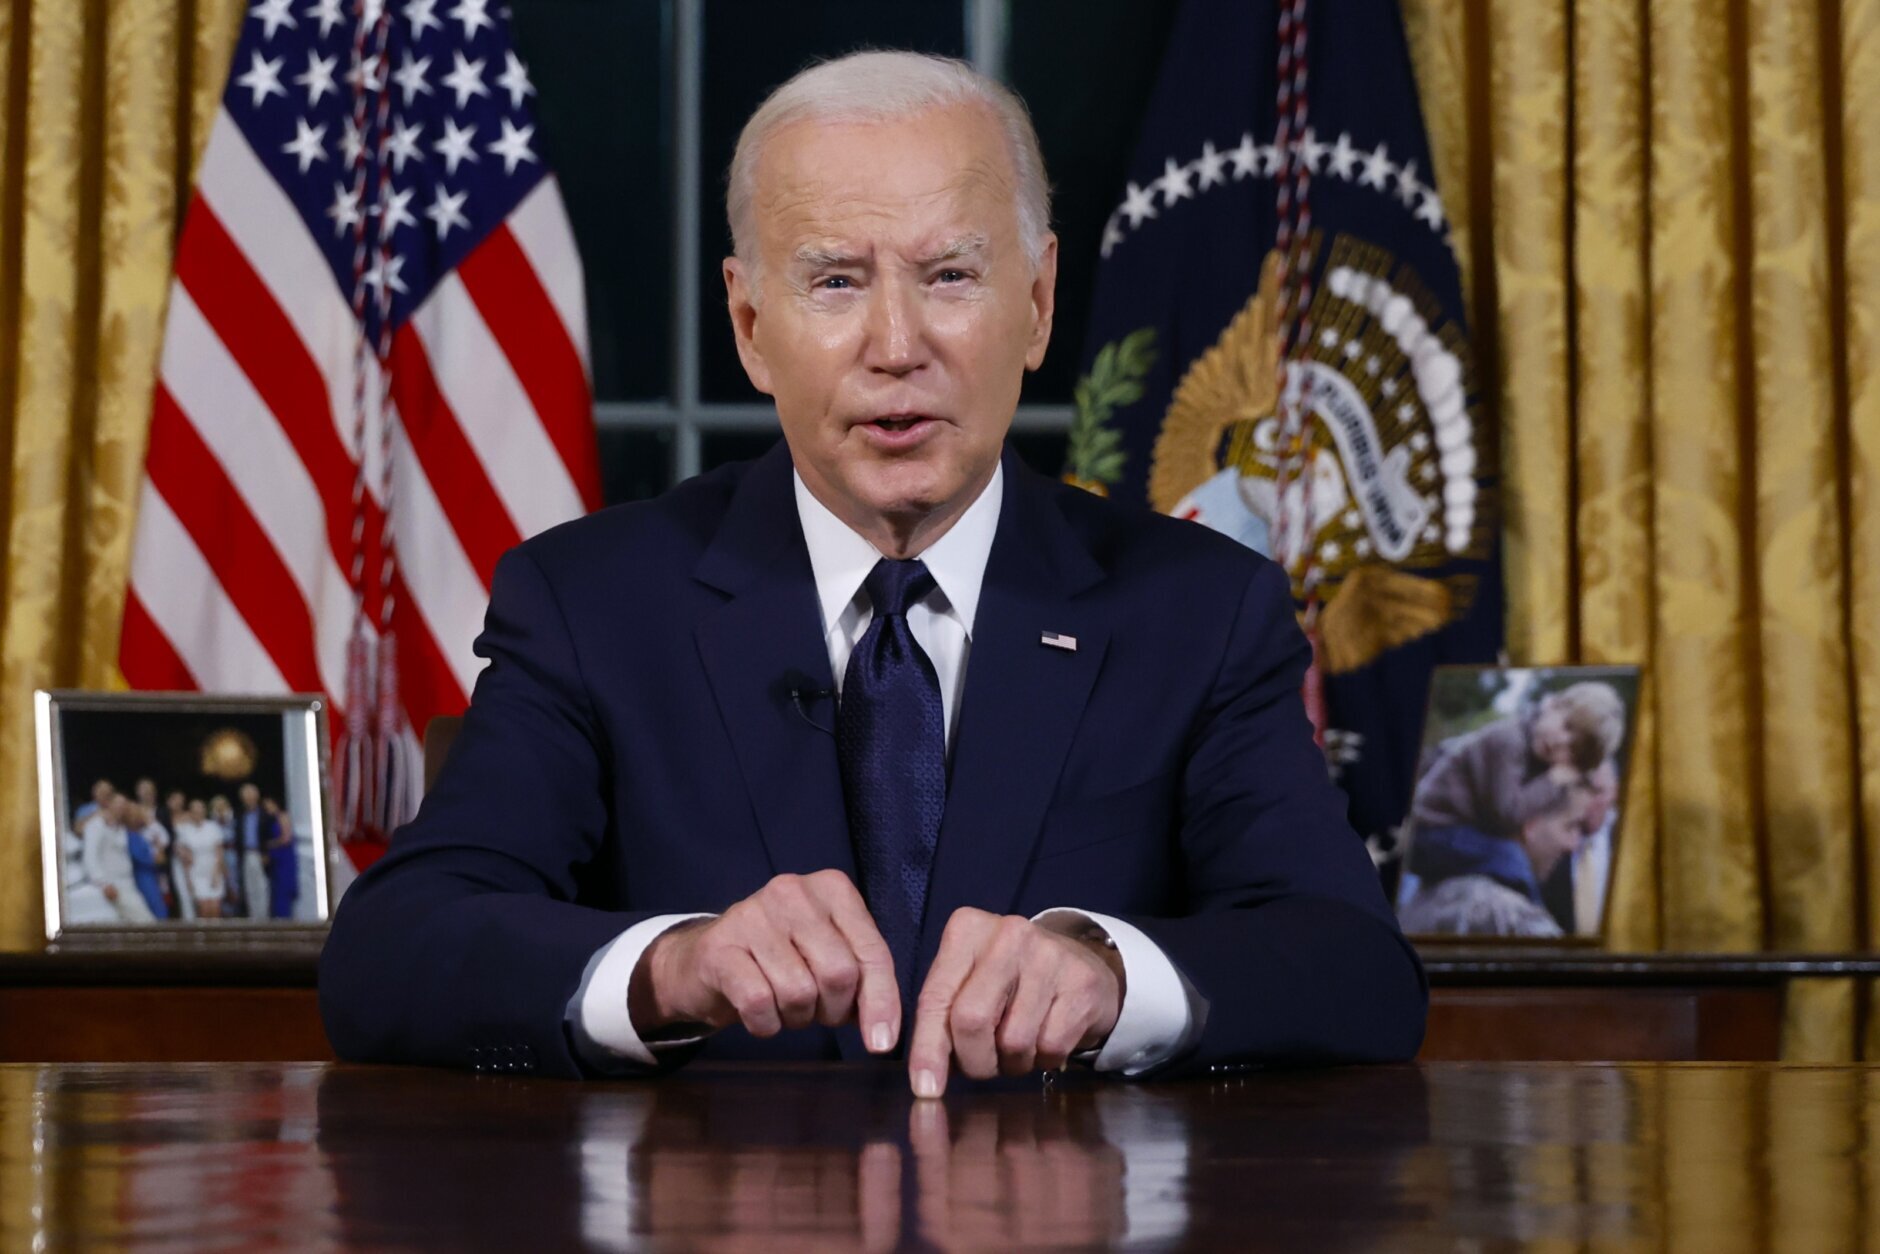 Overdraft fees could drop to as low as $3 under new Biden proposal